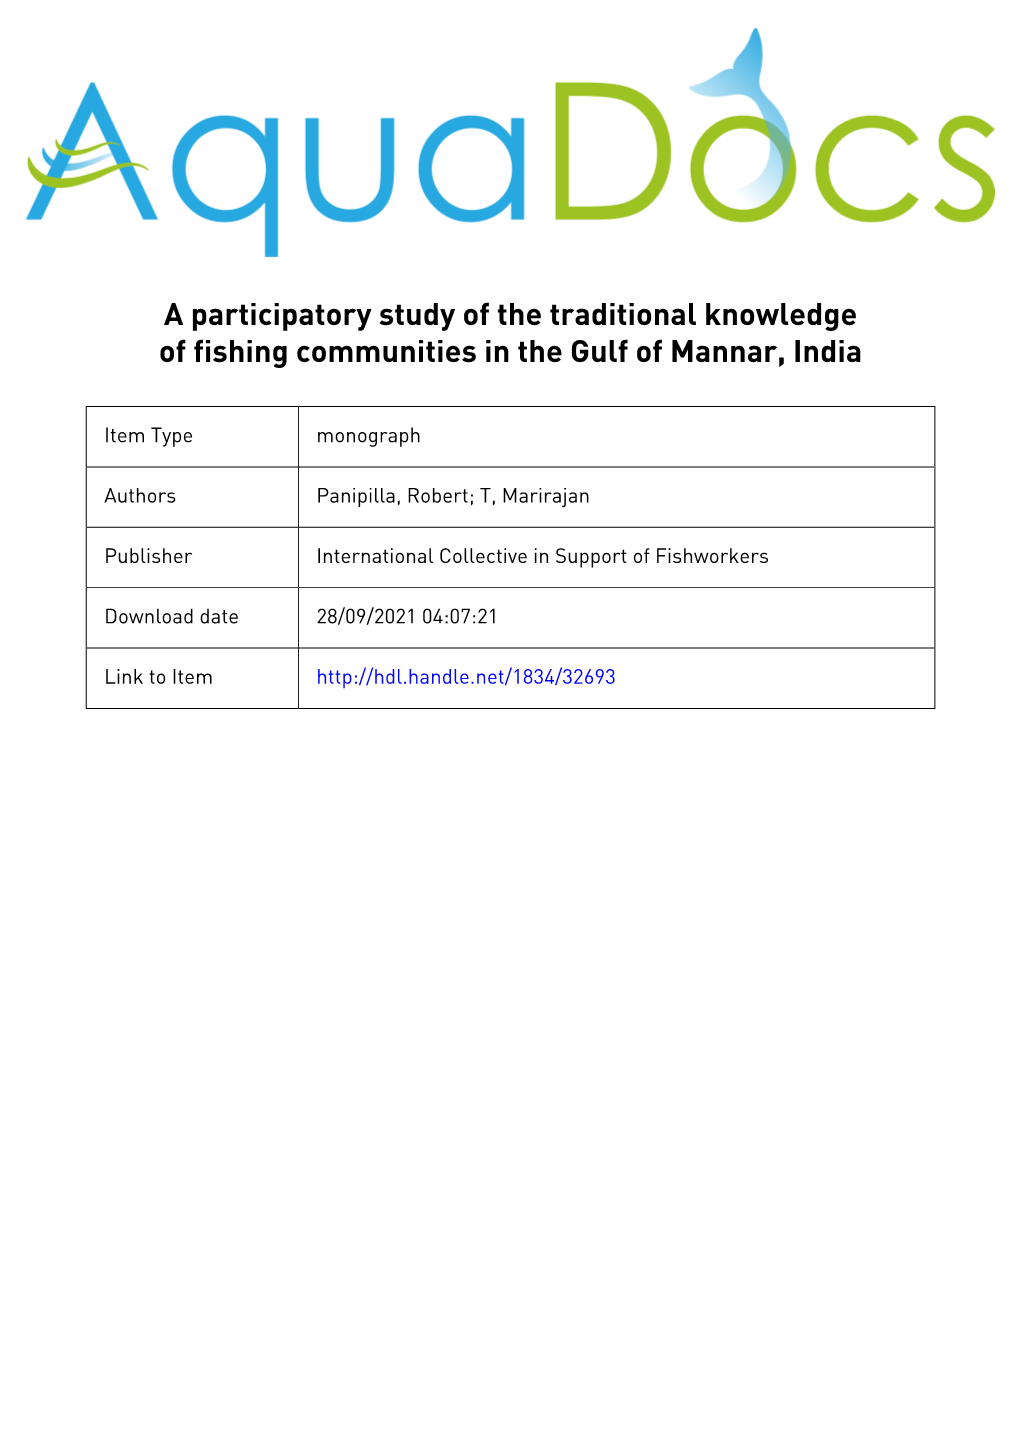 A Participatory Study of the Traditional Knowledge of Fishing Communities in the Gulf of Mannar, India